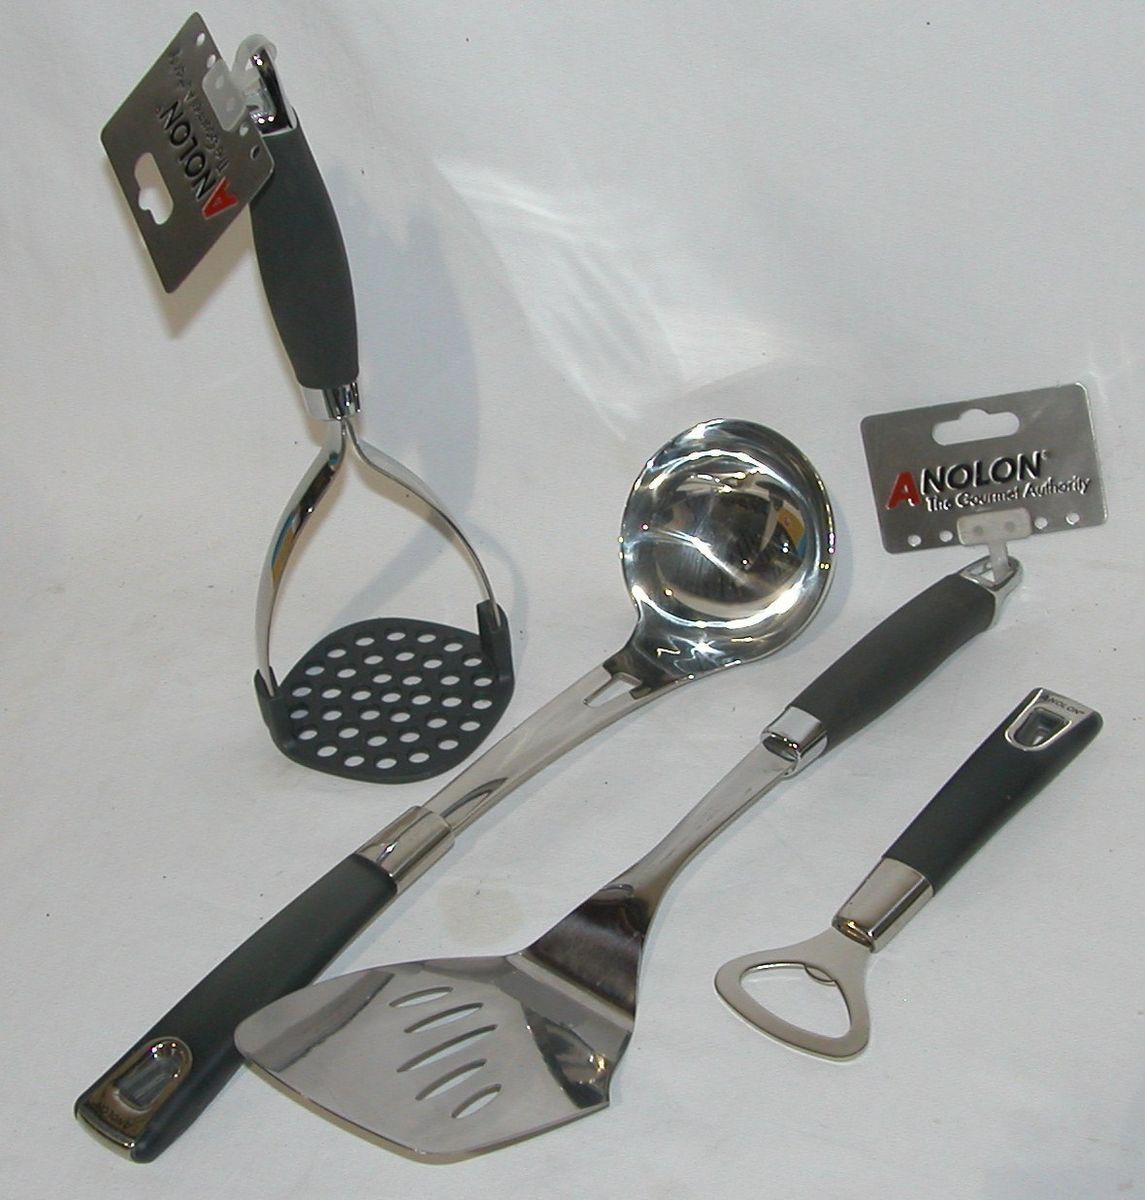 Anolon Advanced Tools Contemporary Stainless Steel Kitchen Utensil Set 